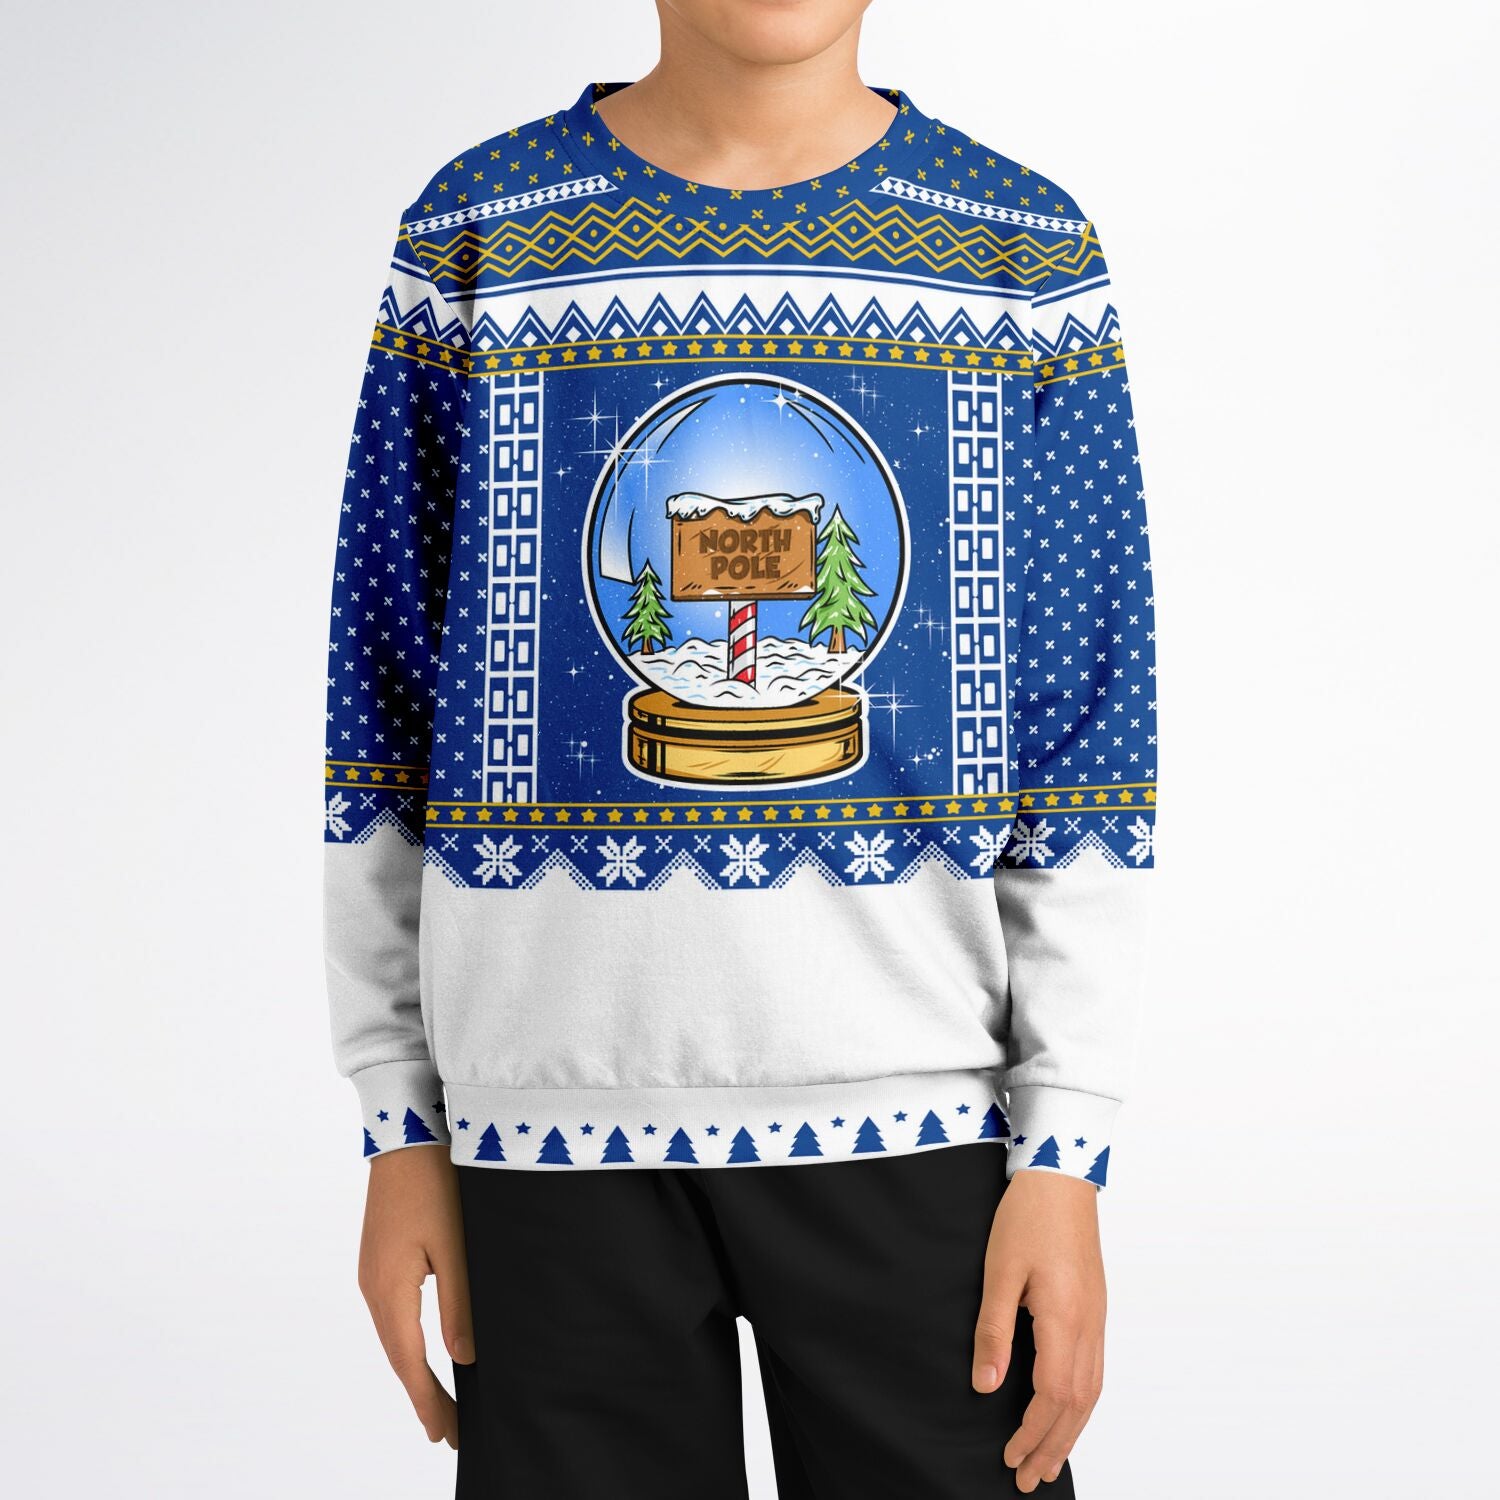 Ugly Holiday Sweater-Snow Globe-Kids/Youth